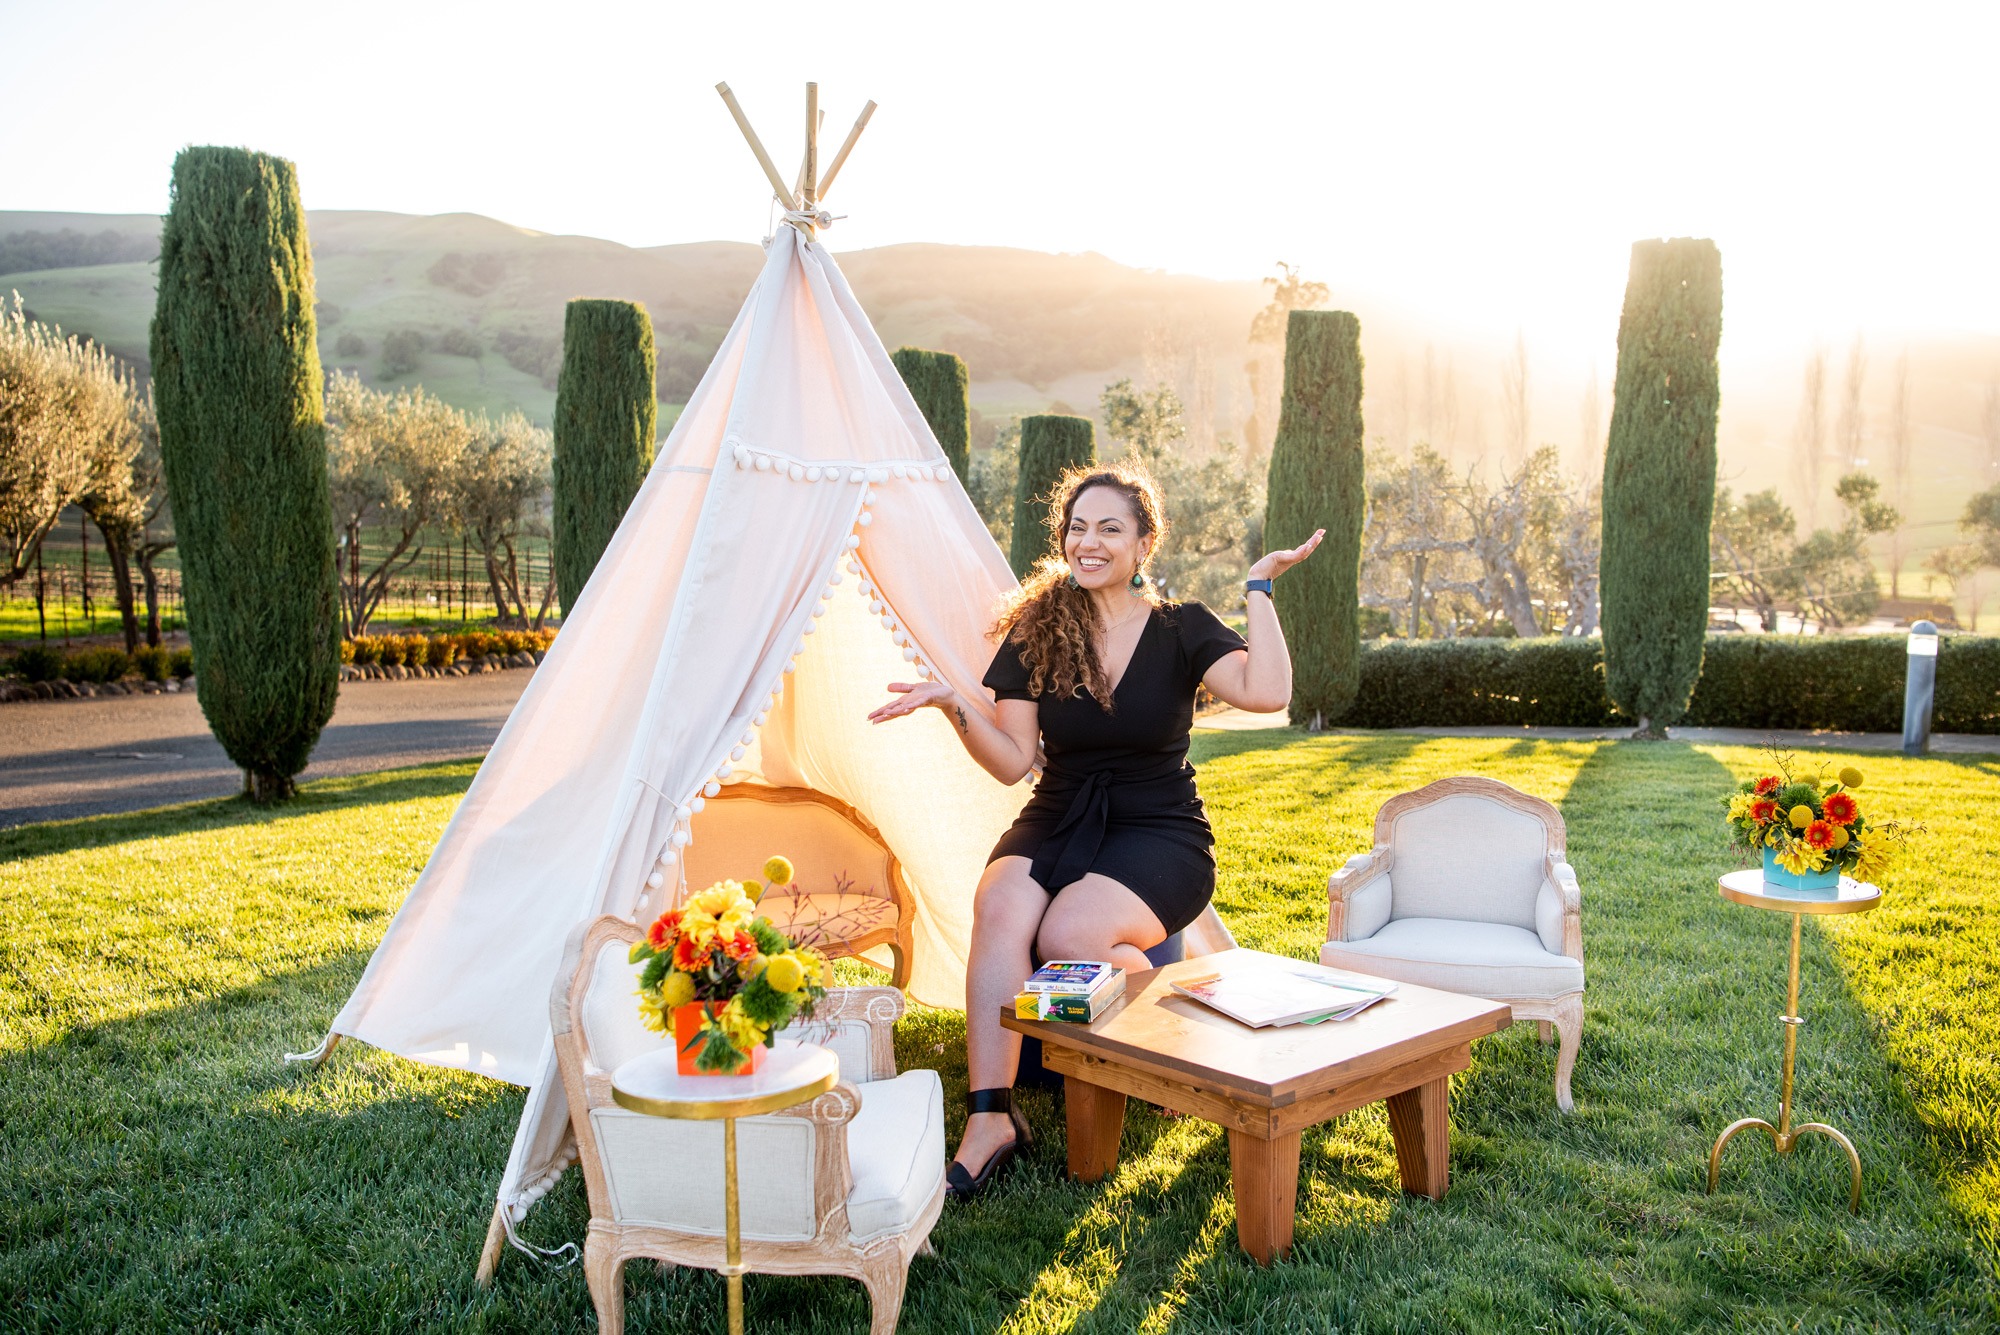  Samar Hattar Wedding Event Planner in California sit in front of a white TeePee.